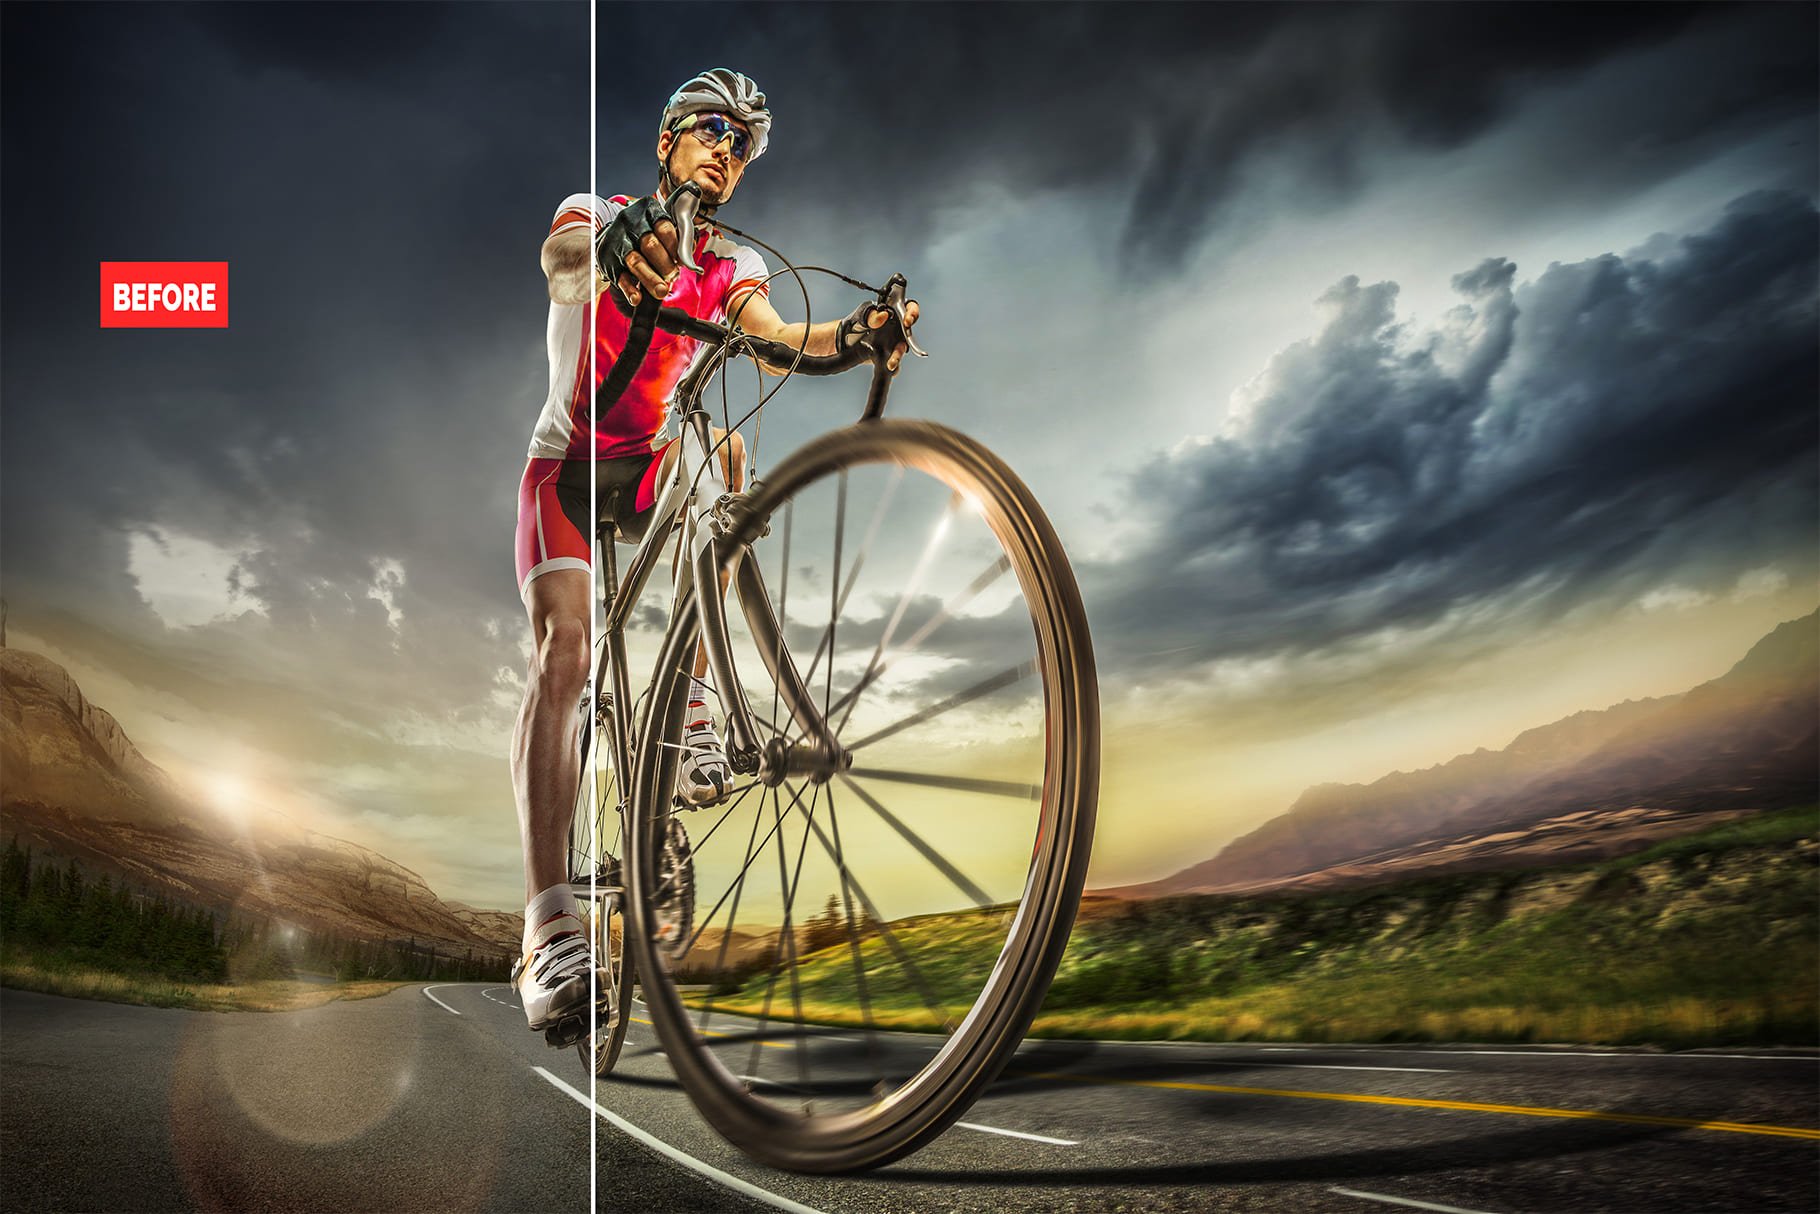 A man riding a bicycle. 120+ Professional HDR Photoshop Actions Collection.